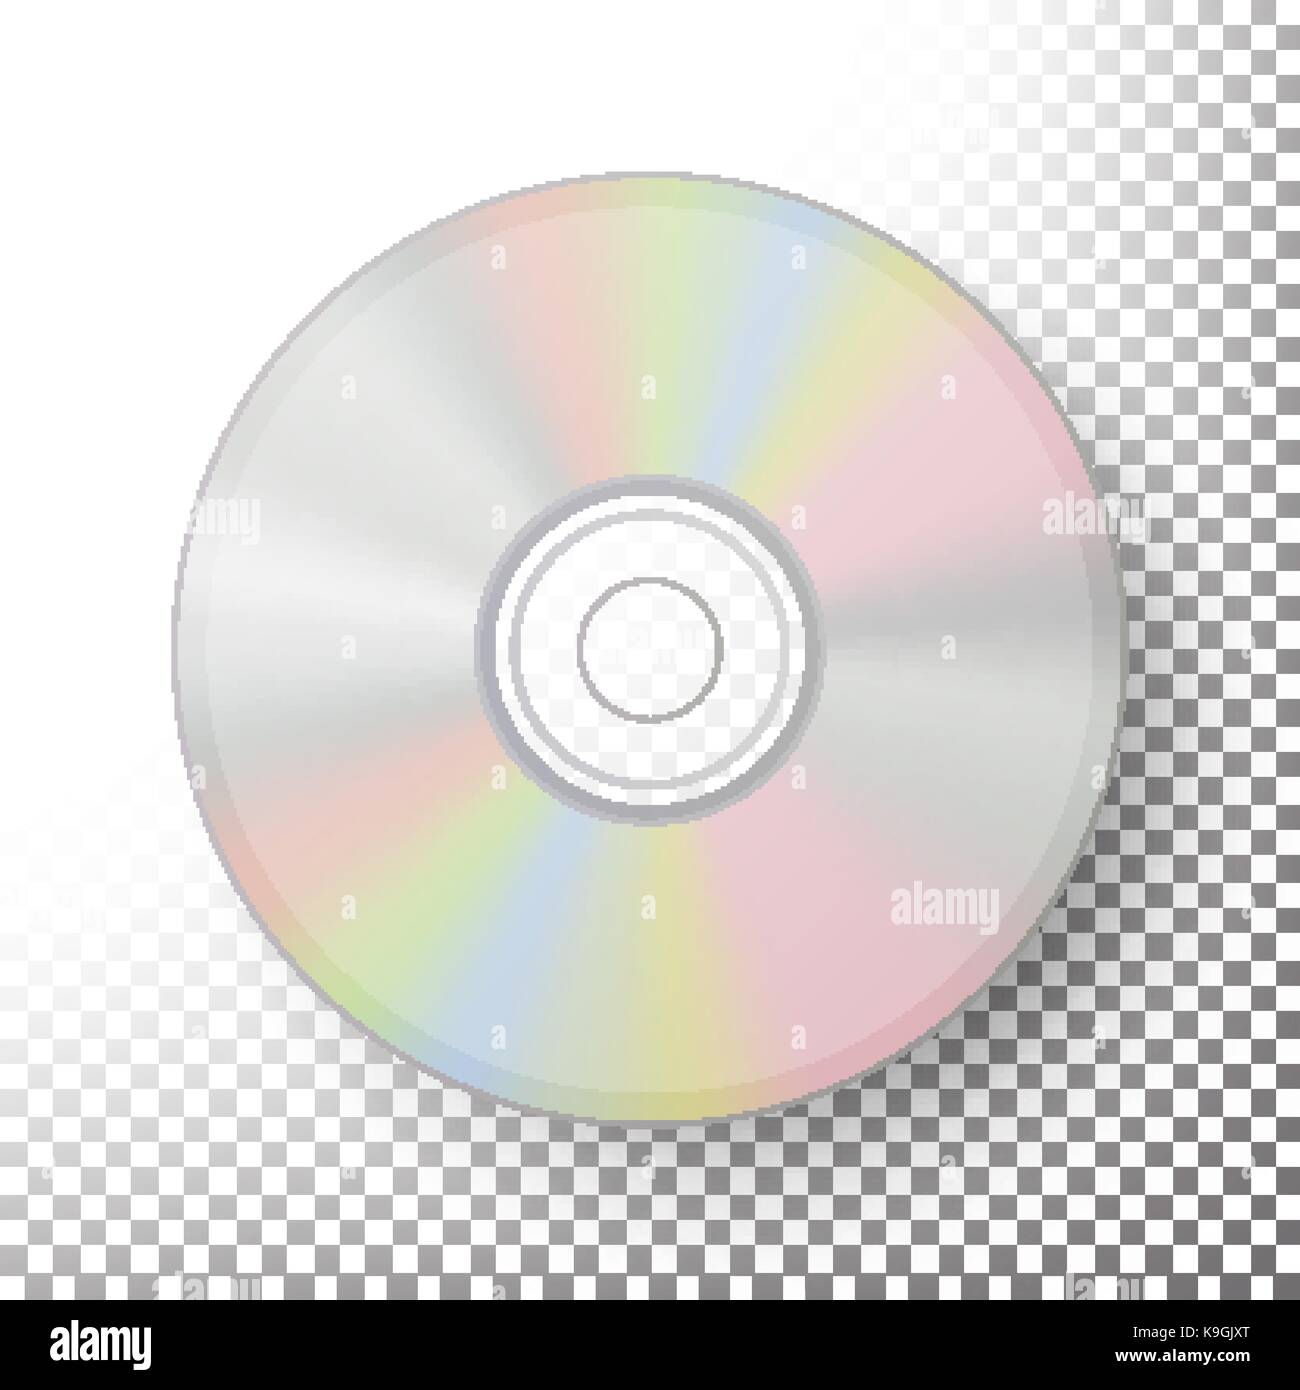 Blank Cd Template On Transparent Background With Shadow Stock